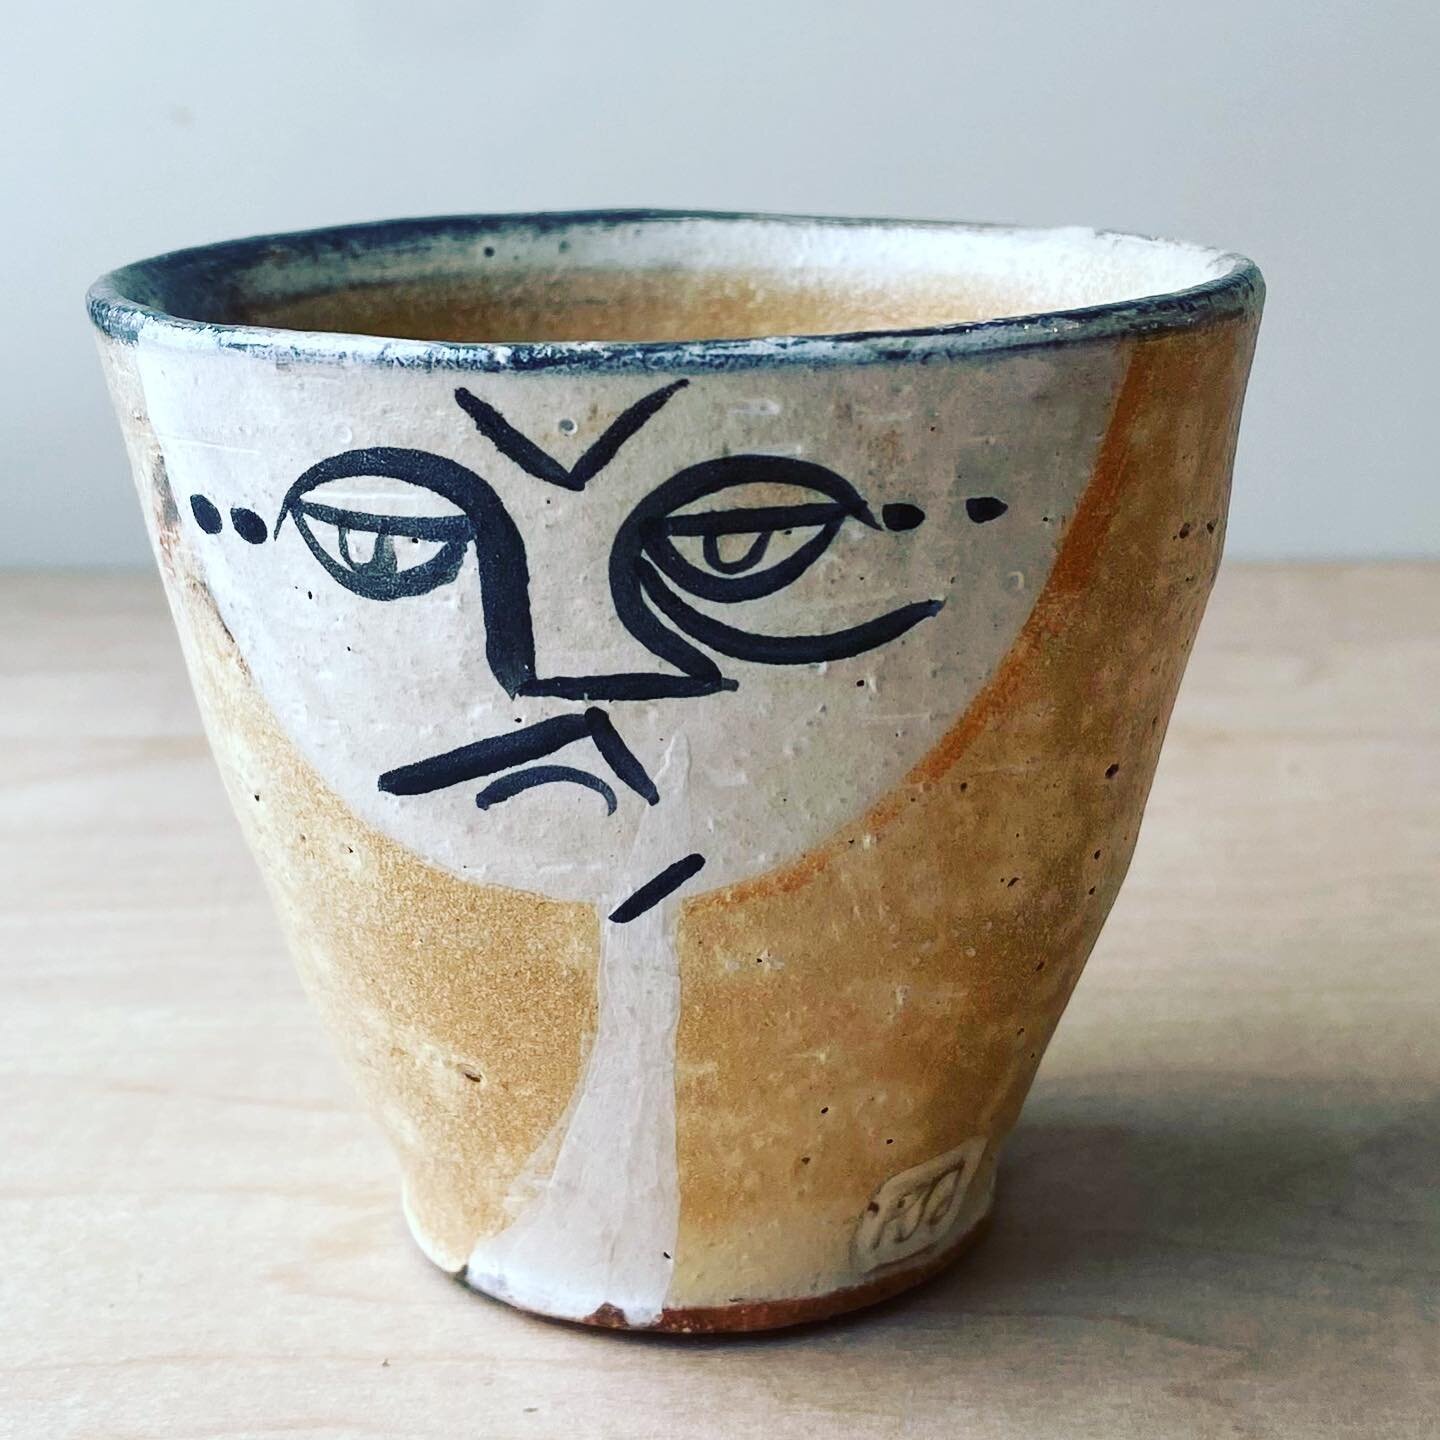 Mug by @jadoonath on the current POW! Kickstarter. We&rsquo;re raising money to launch an exhibition of work by 19 Black clay artists @nceca in #cincinnati @clayholdswater @cincycac Peter&rsquo;s delightful cup is one of many incentives&mdash;find th